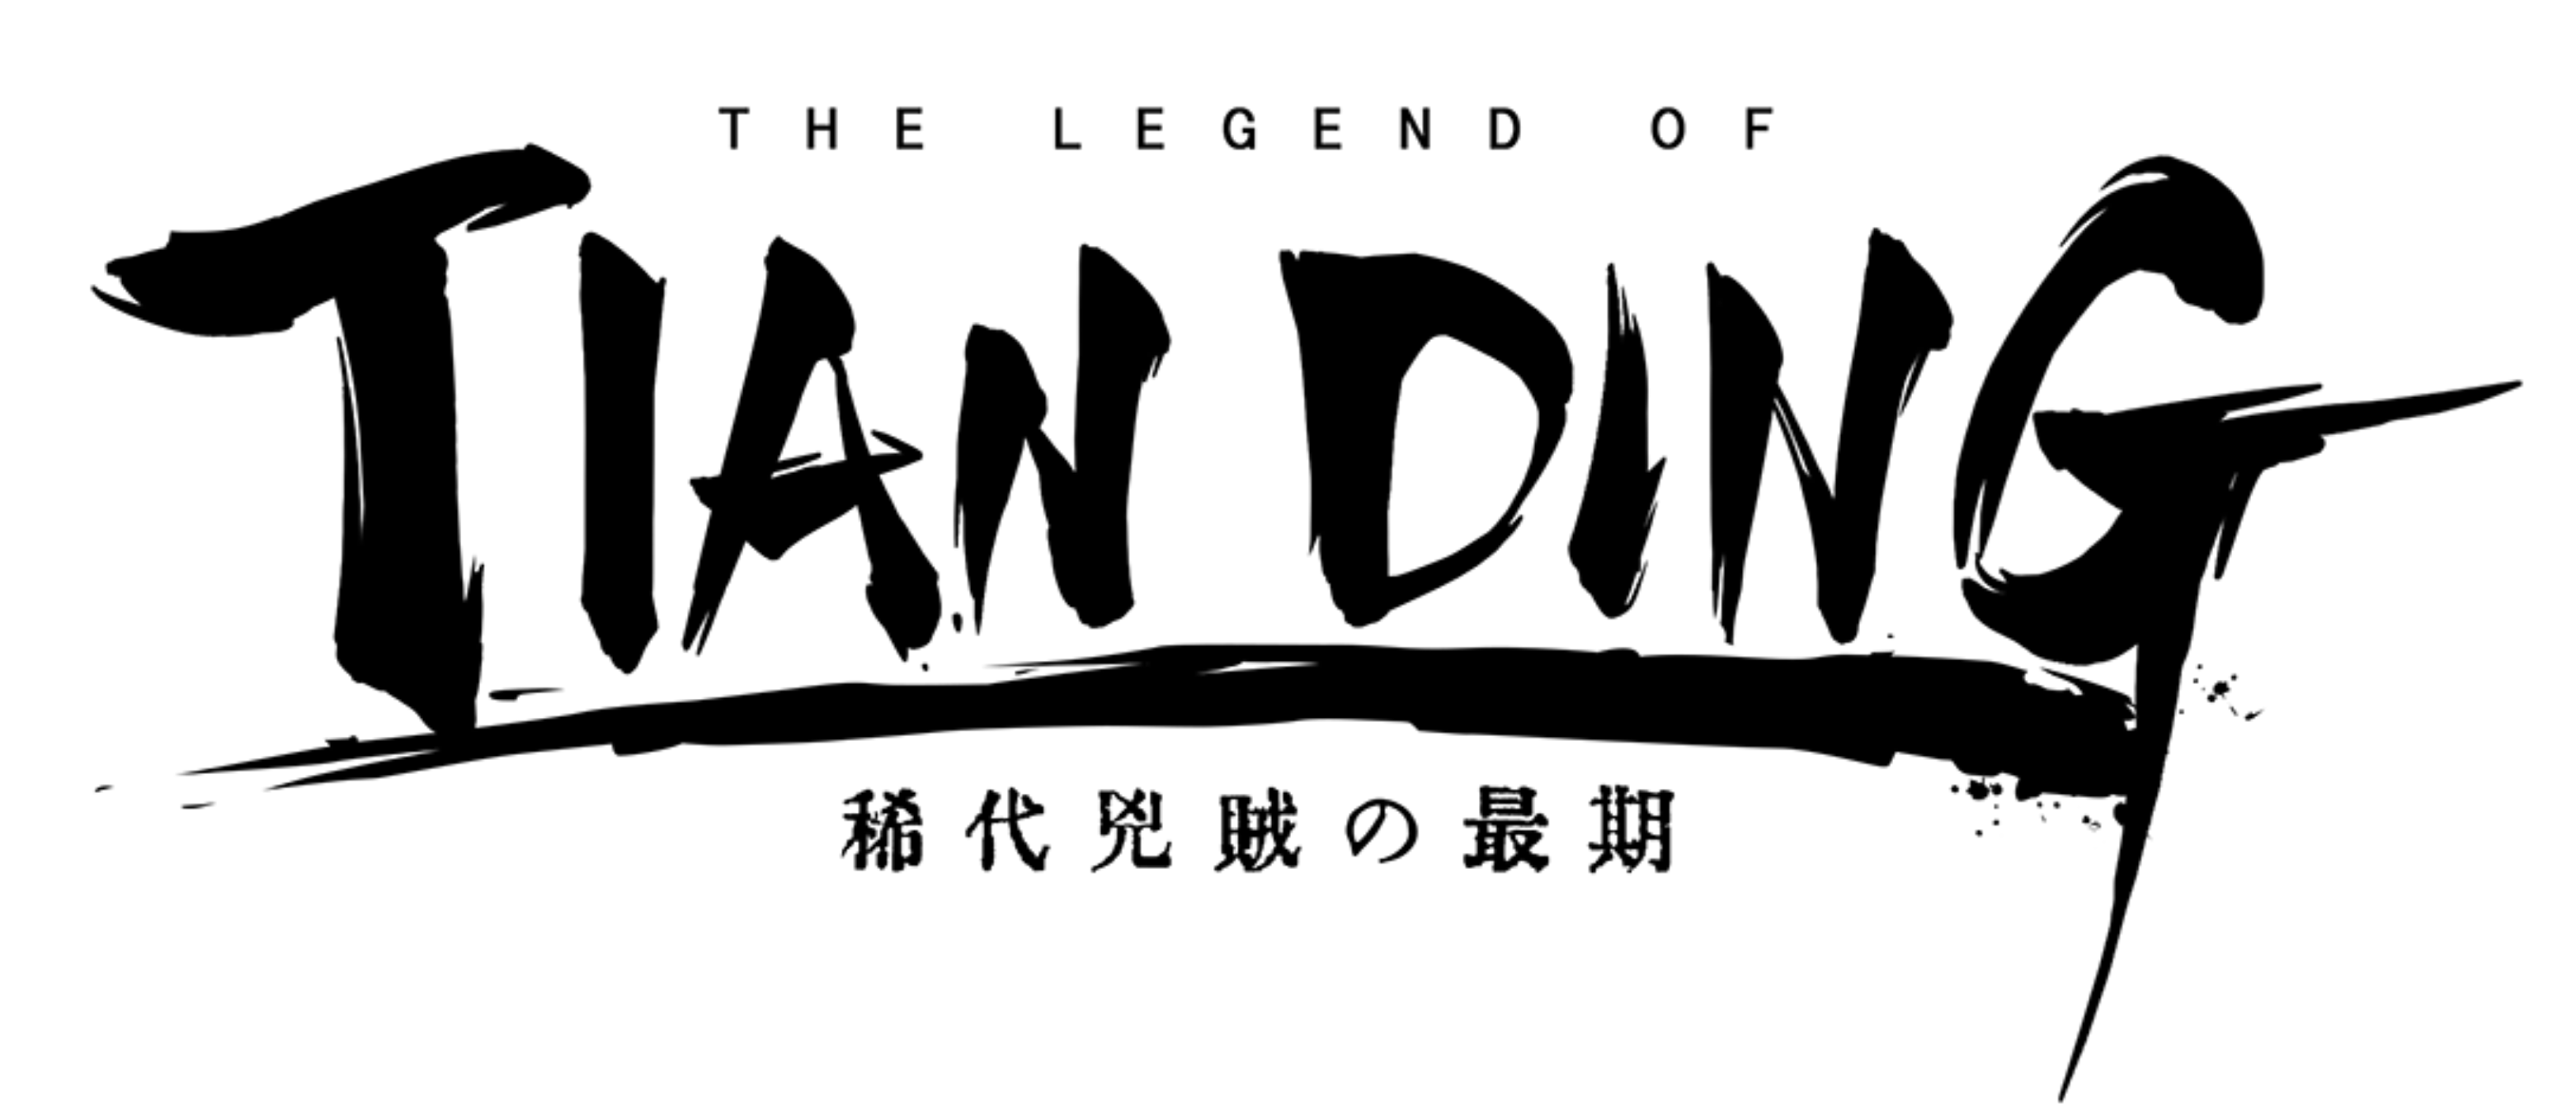 the legend of tianding pc